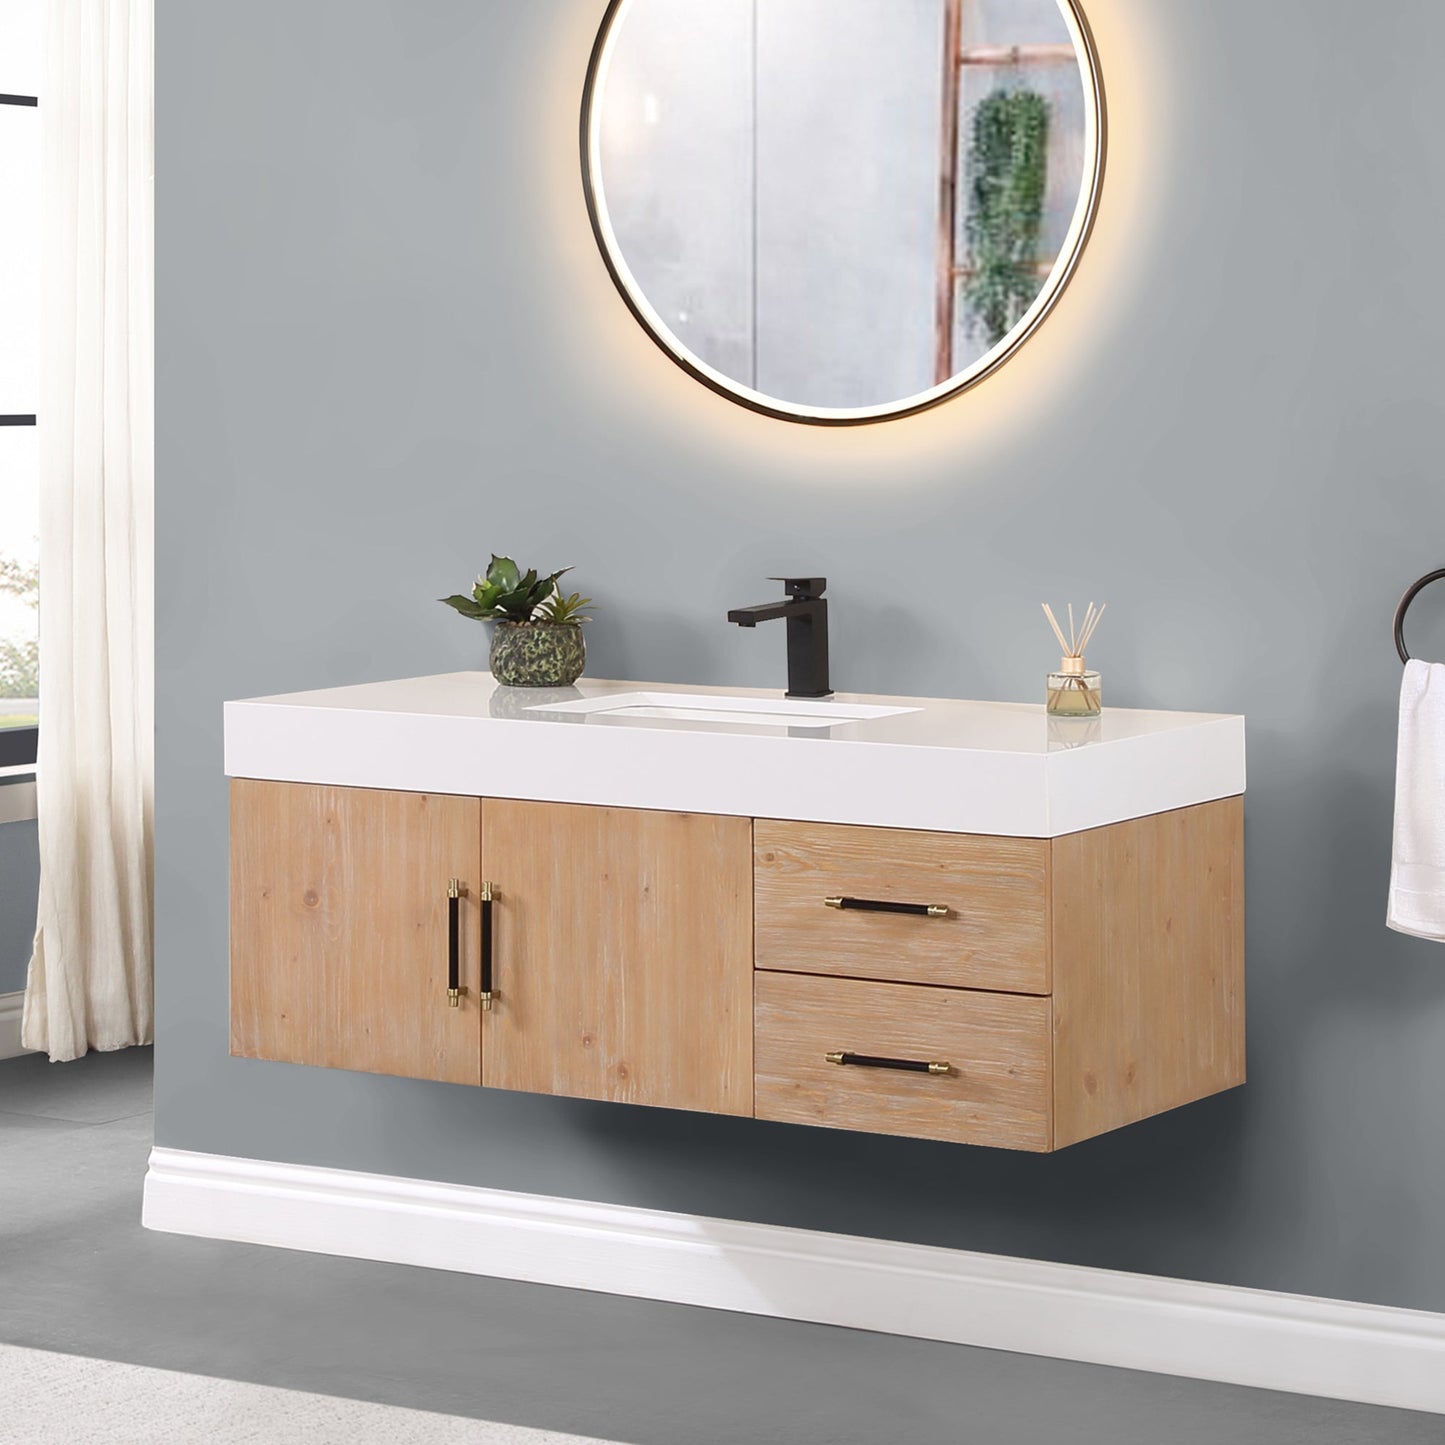 Corchia 48" Wall-mounted Single Bathroom Vanity in Light Brown with White Composite Stone Countertop without Mirror